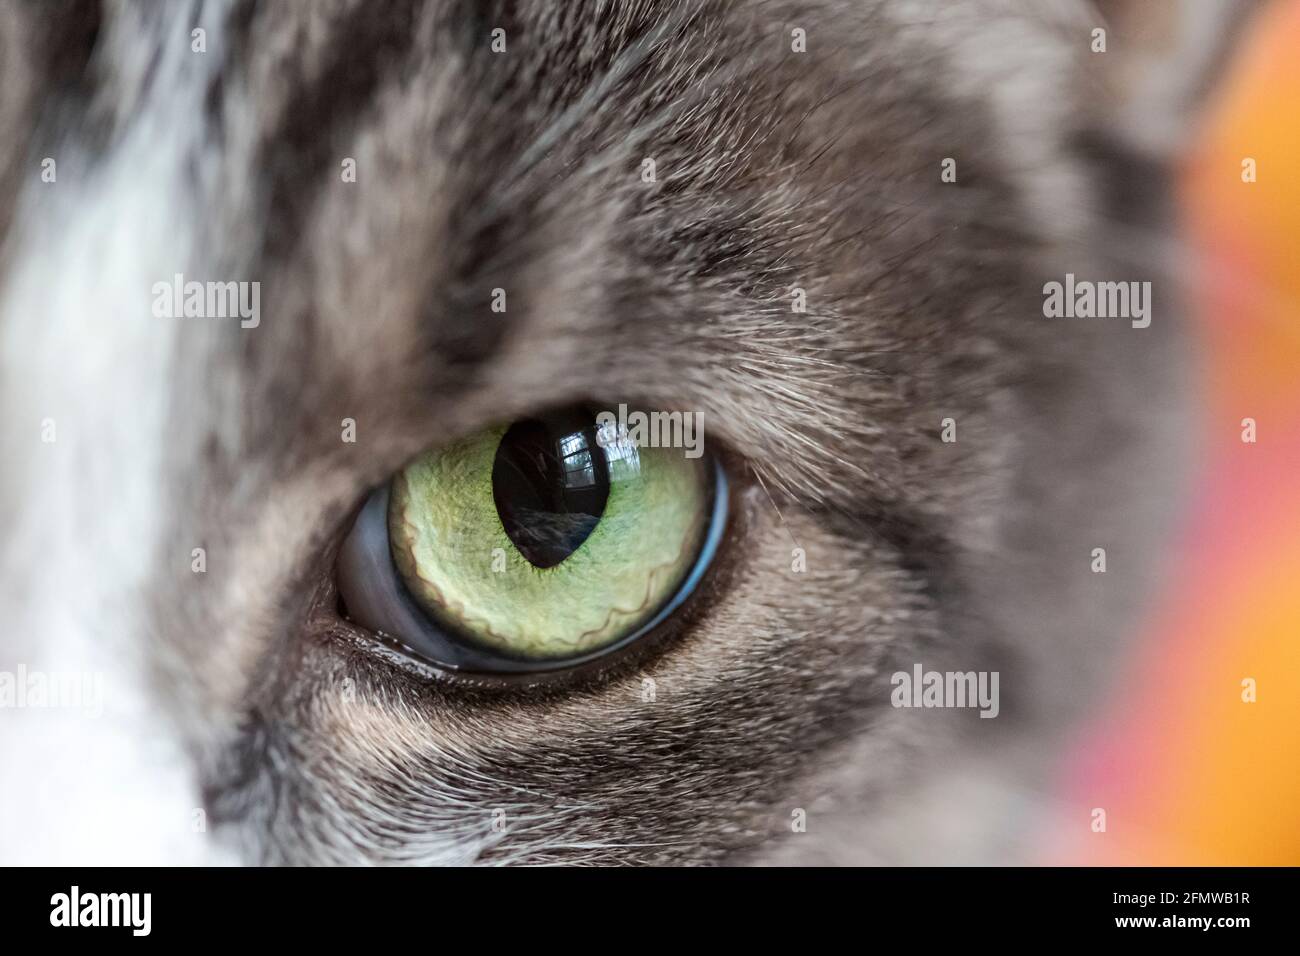 Close up of green cat eye, Domestic Shorthair, striped grey and white tabby cat. Stock Photo